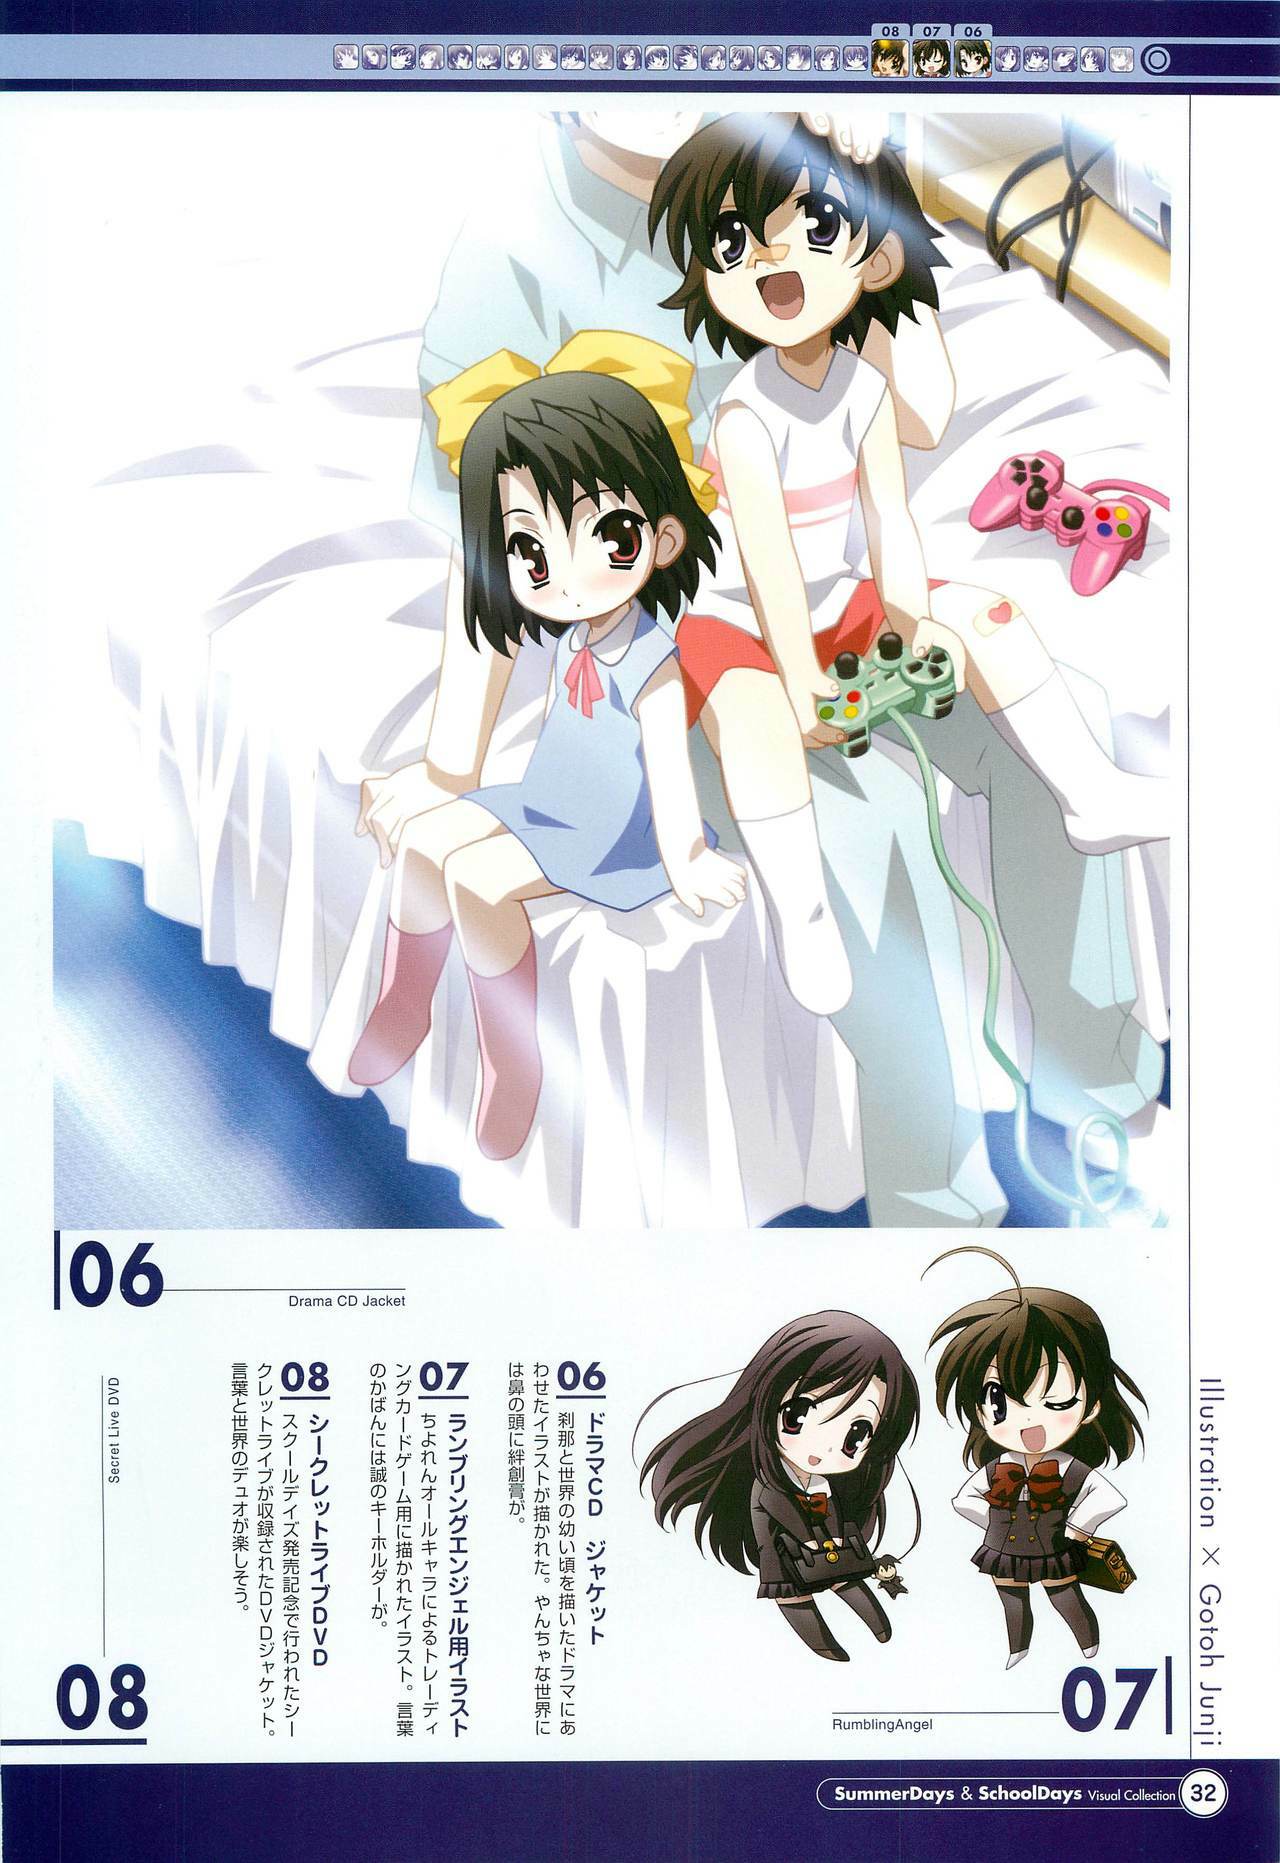 SummerDays & School Days Visual Collection page 34 full